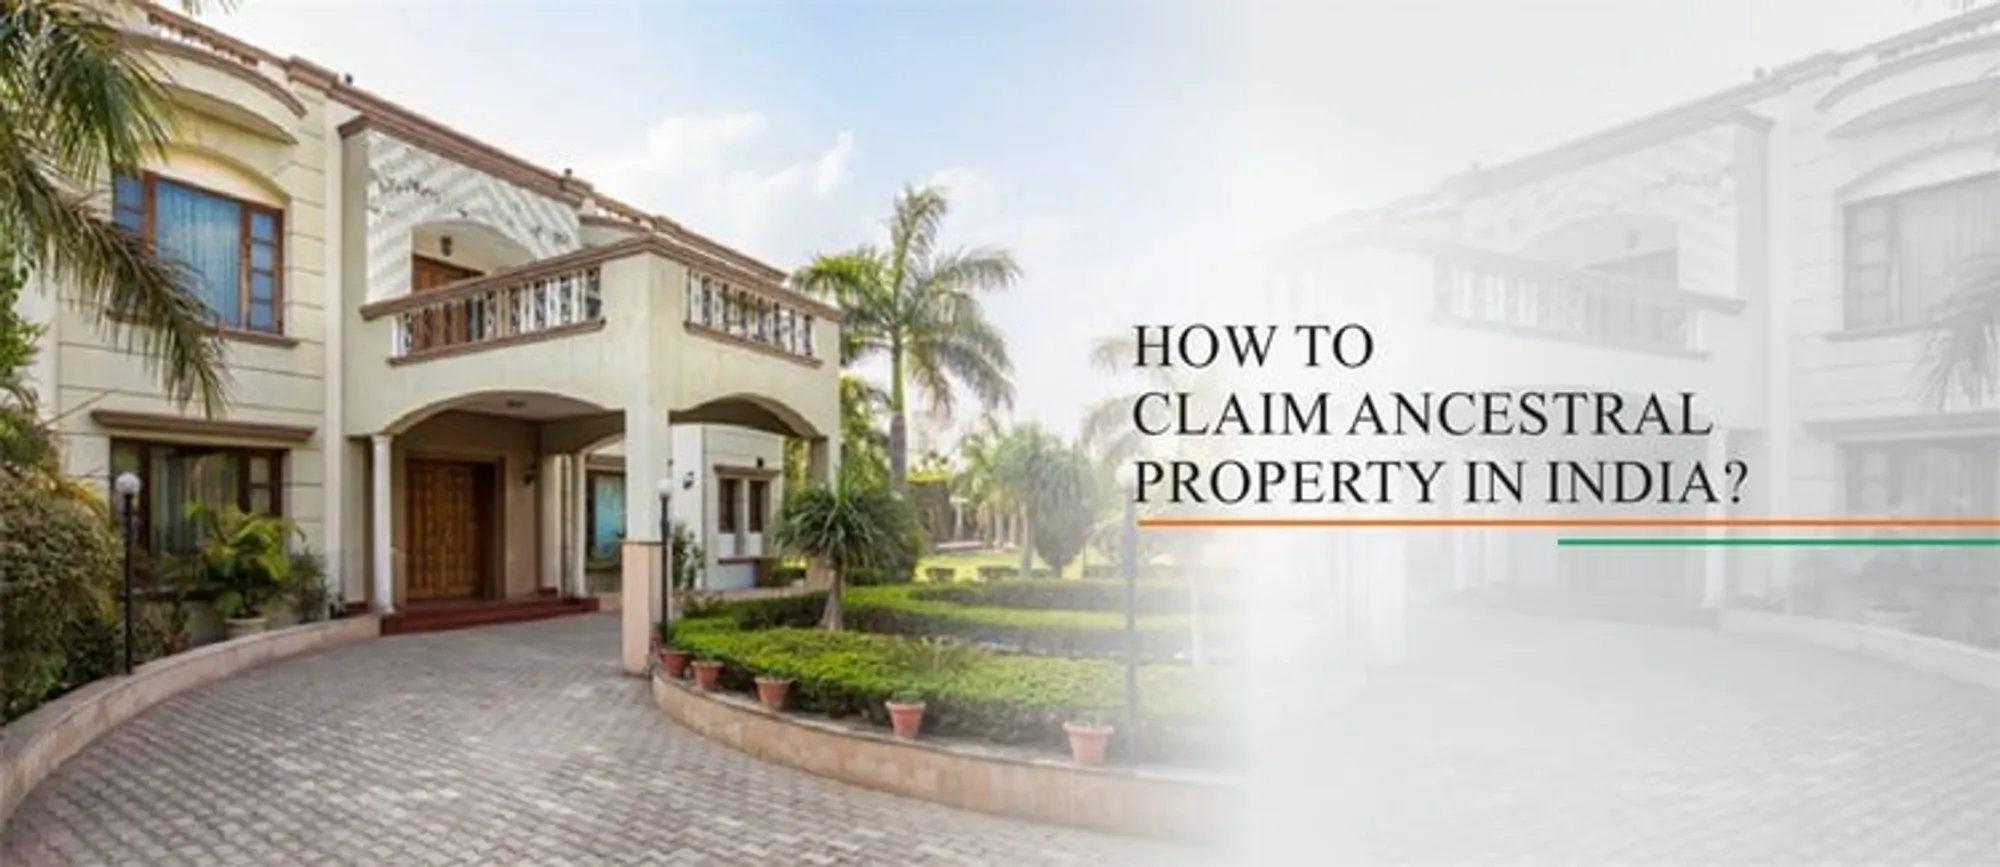 How to Claim Ancestral Property in India?